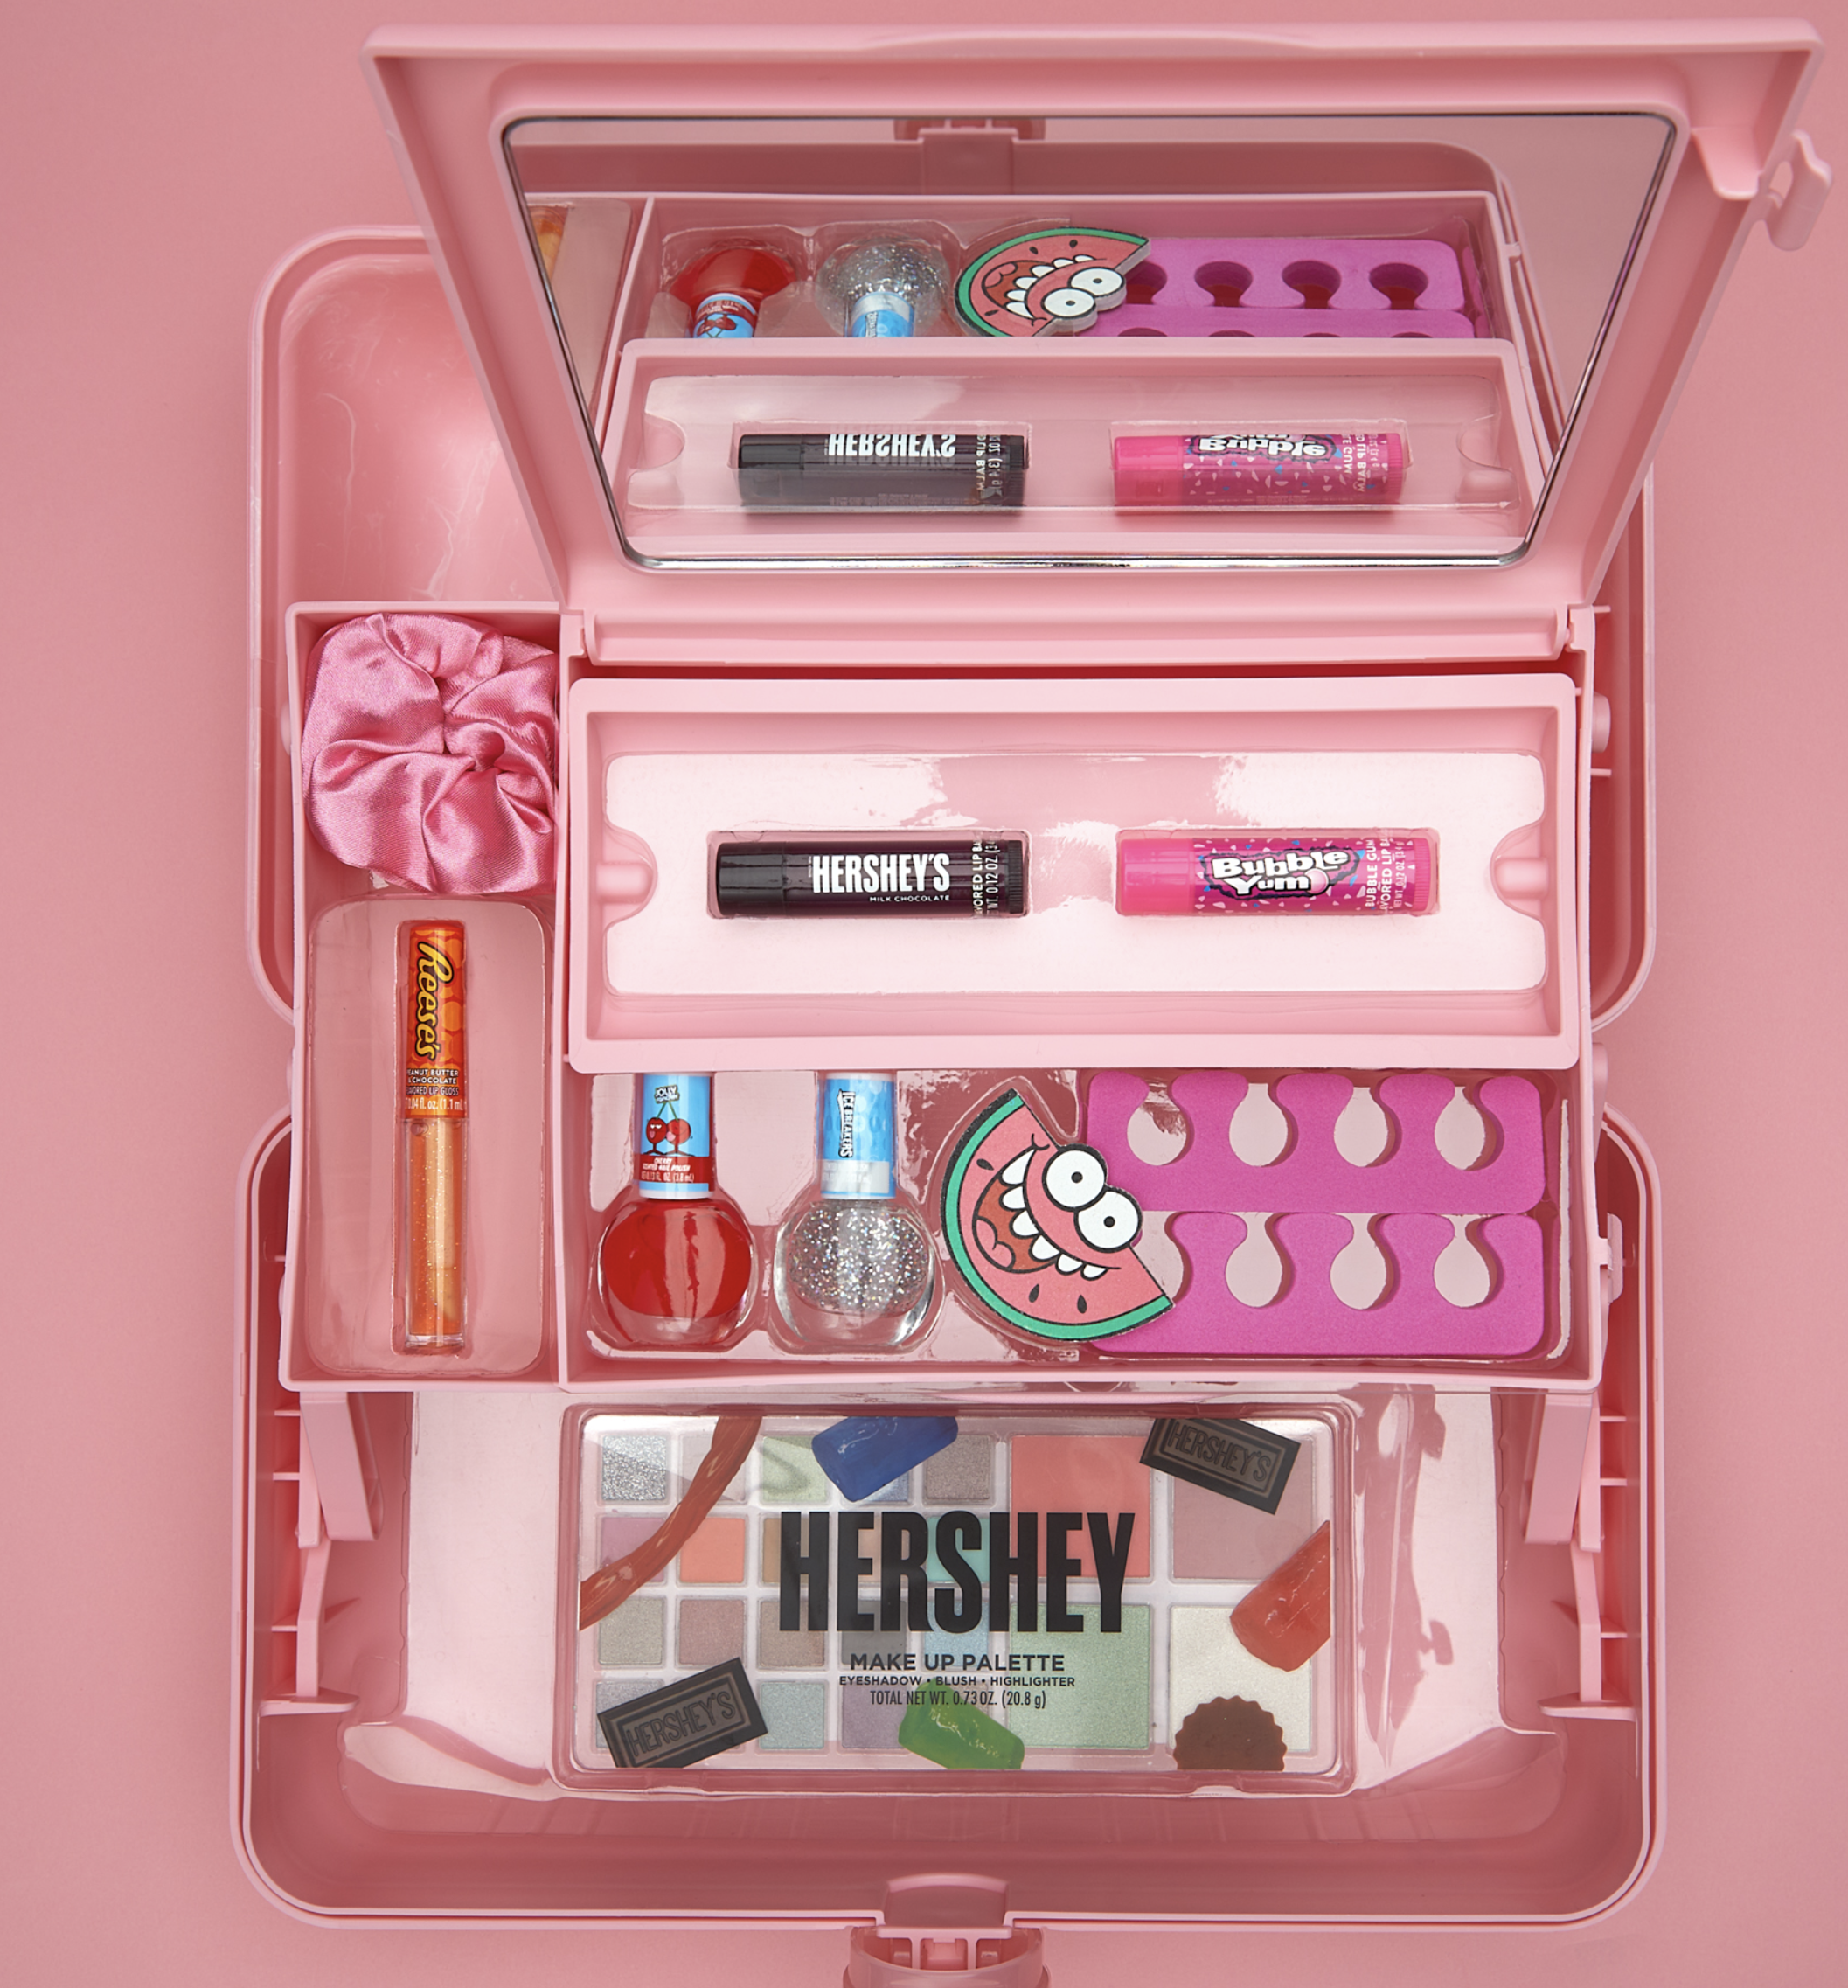 The Hershey Company Collaborates With Taste Beauty and Caboodles